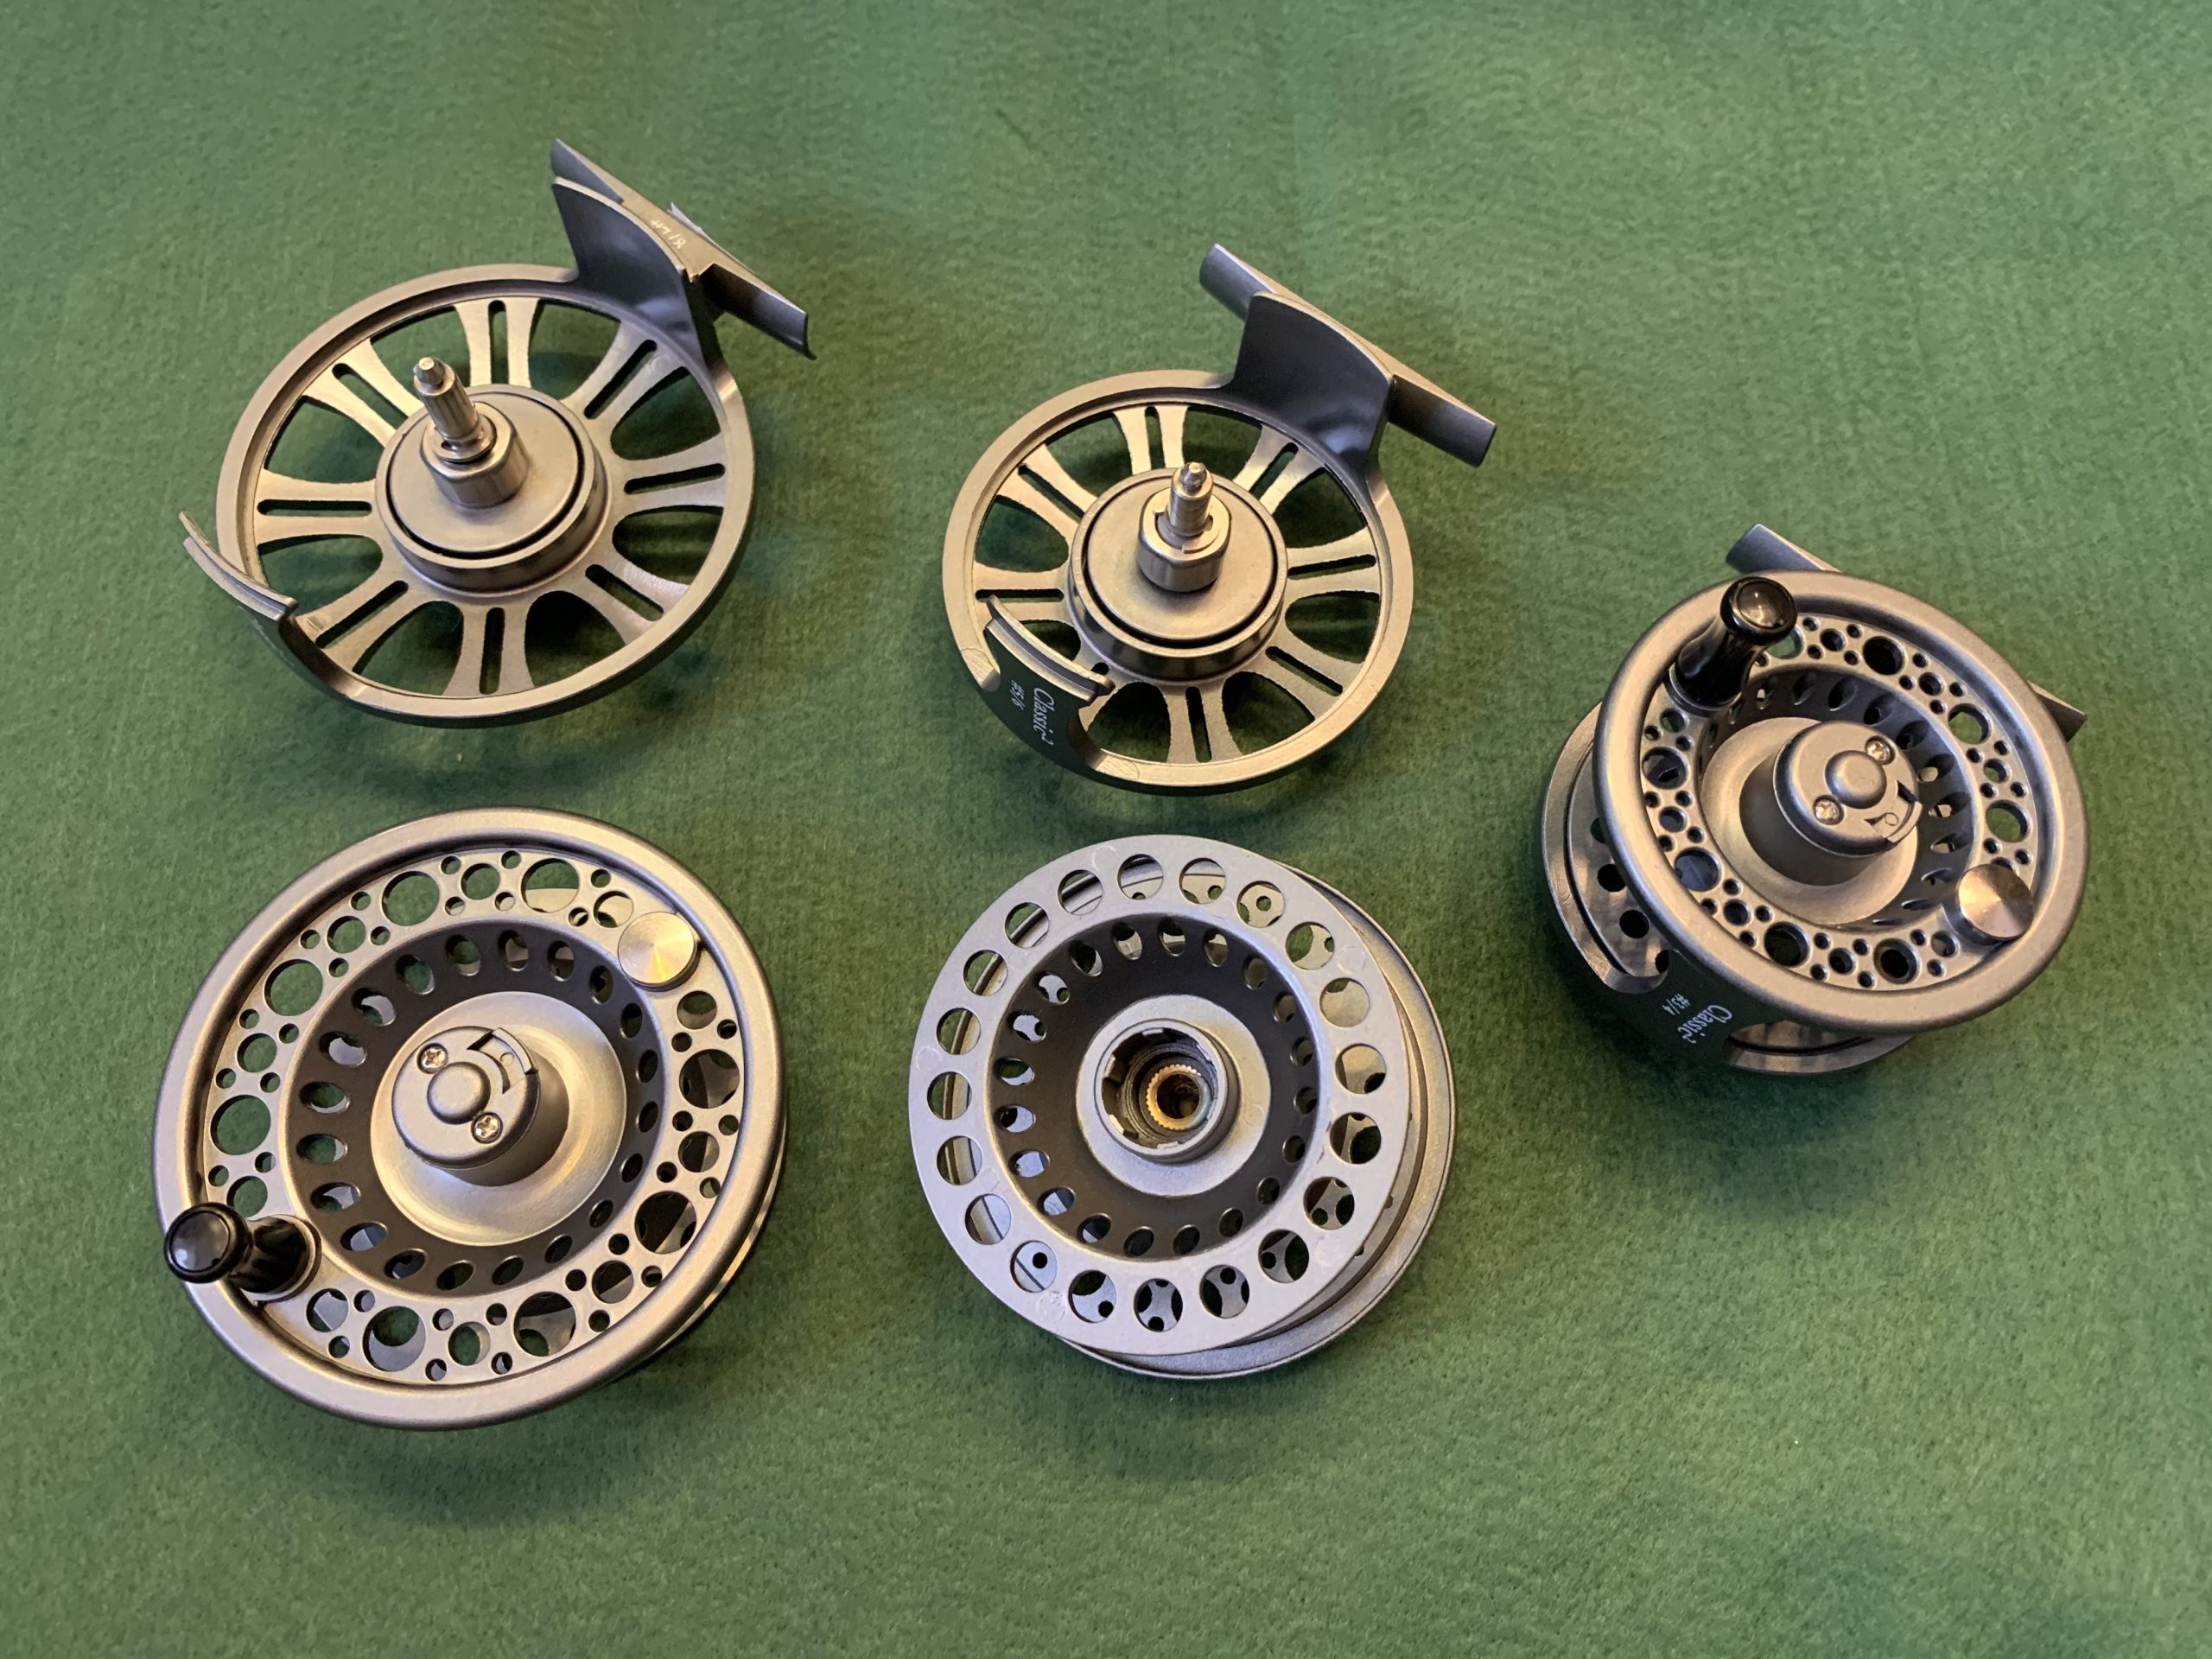 Snowbee Classic 2 Fly Reel. New, in #3/4, #5/6 and #7/8 – Lance